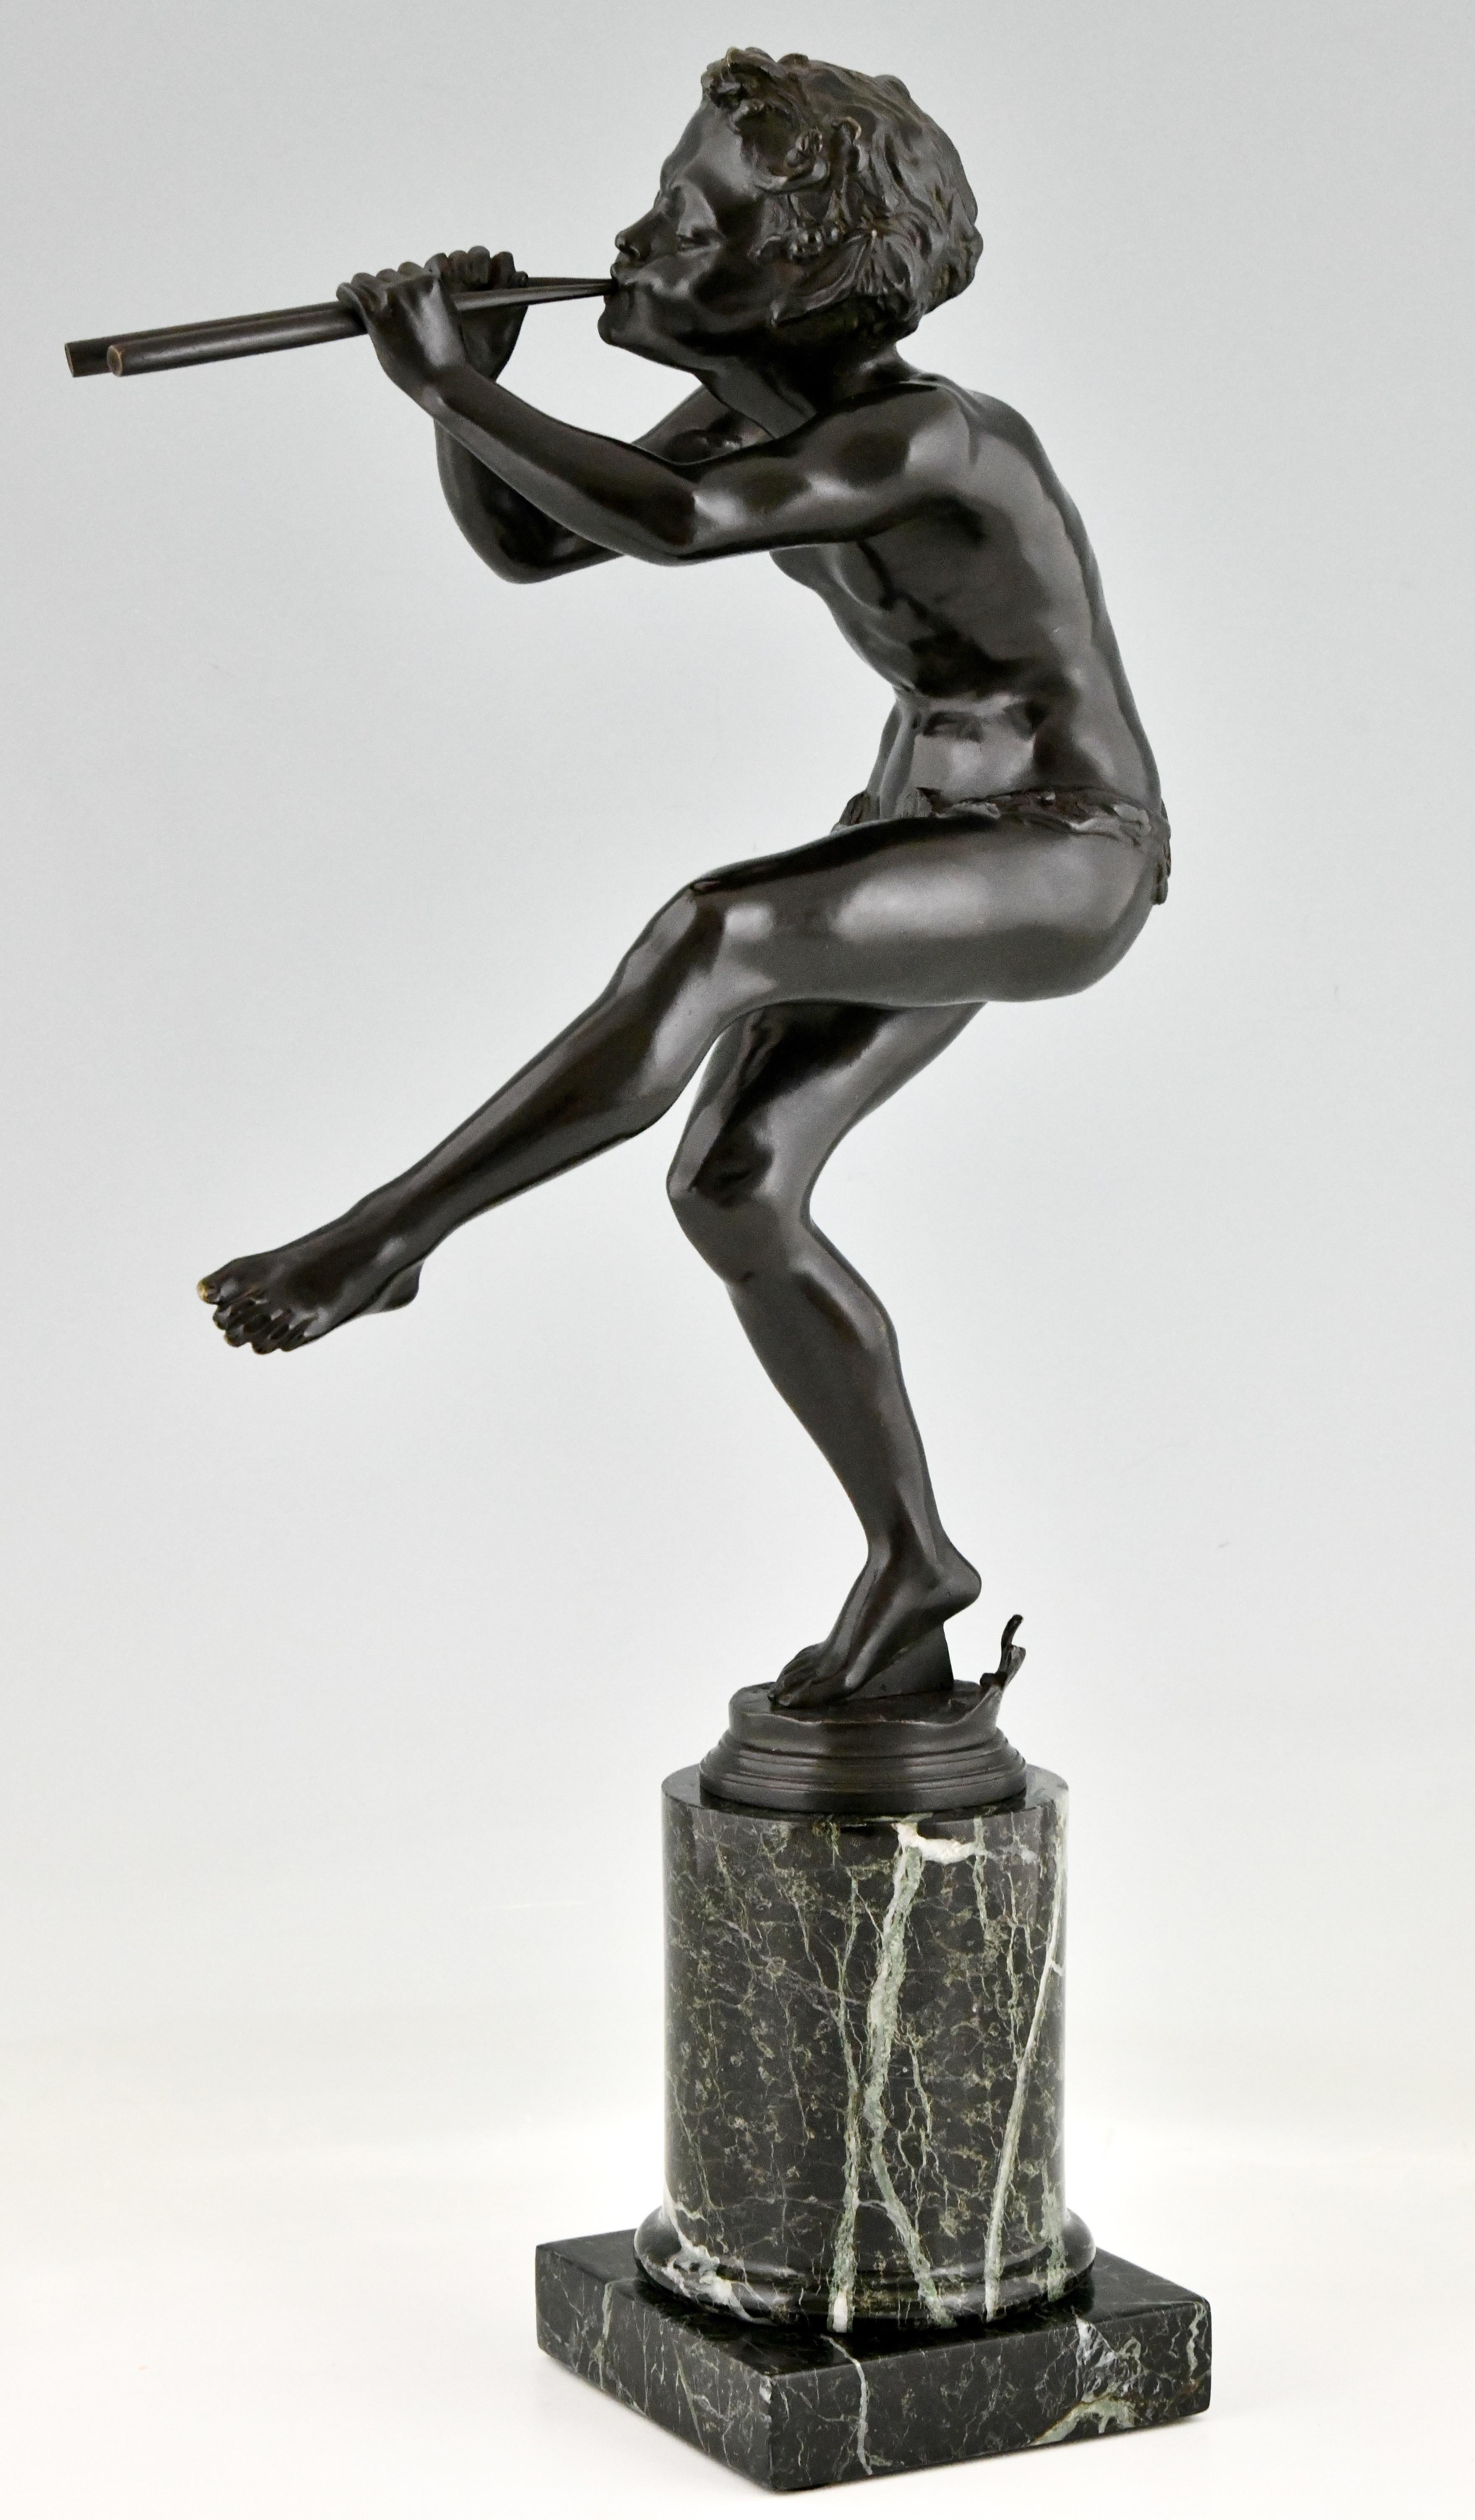 Art Deco bronze sculpture dancing faun with flutes by Edouard Drouot. 
Bronze with dark green patina on green marble base. France 1920
Literature:
Art Deco and other figures by Brian Catley, Antique collectors club.
Les bronzes de XIXe siècle by